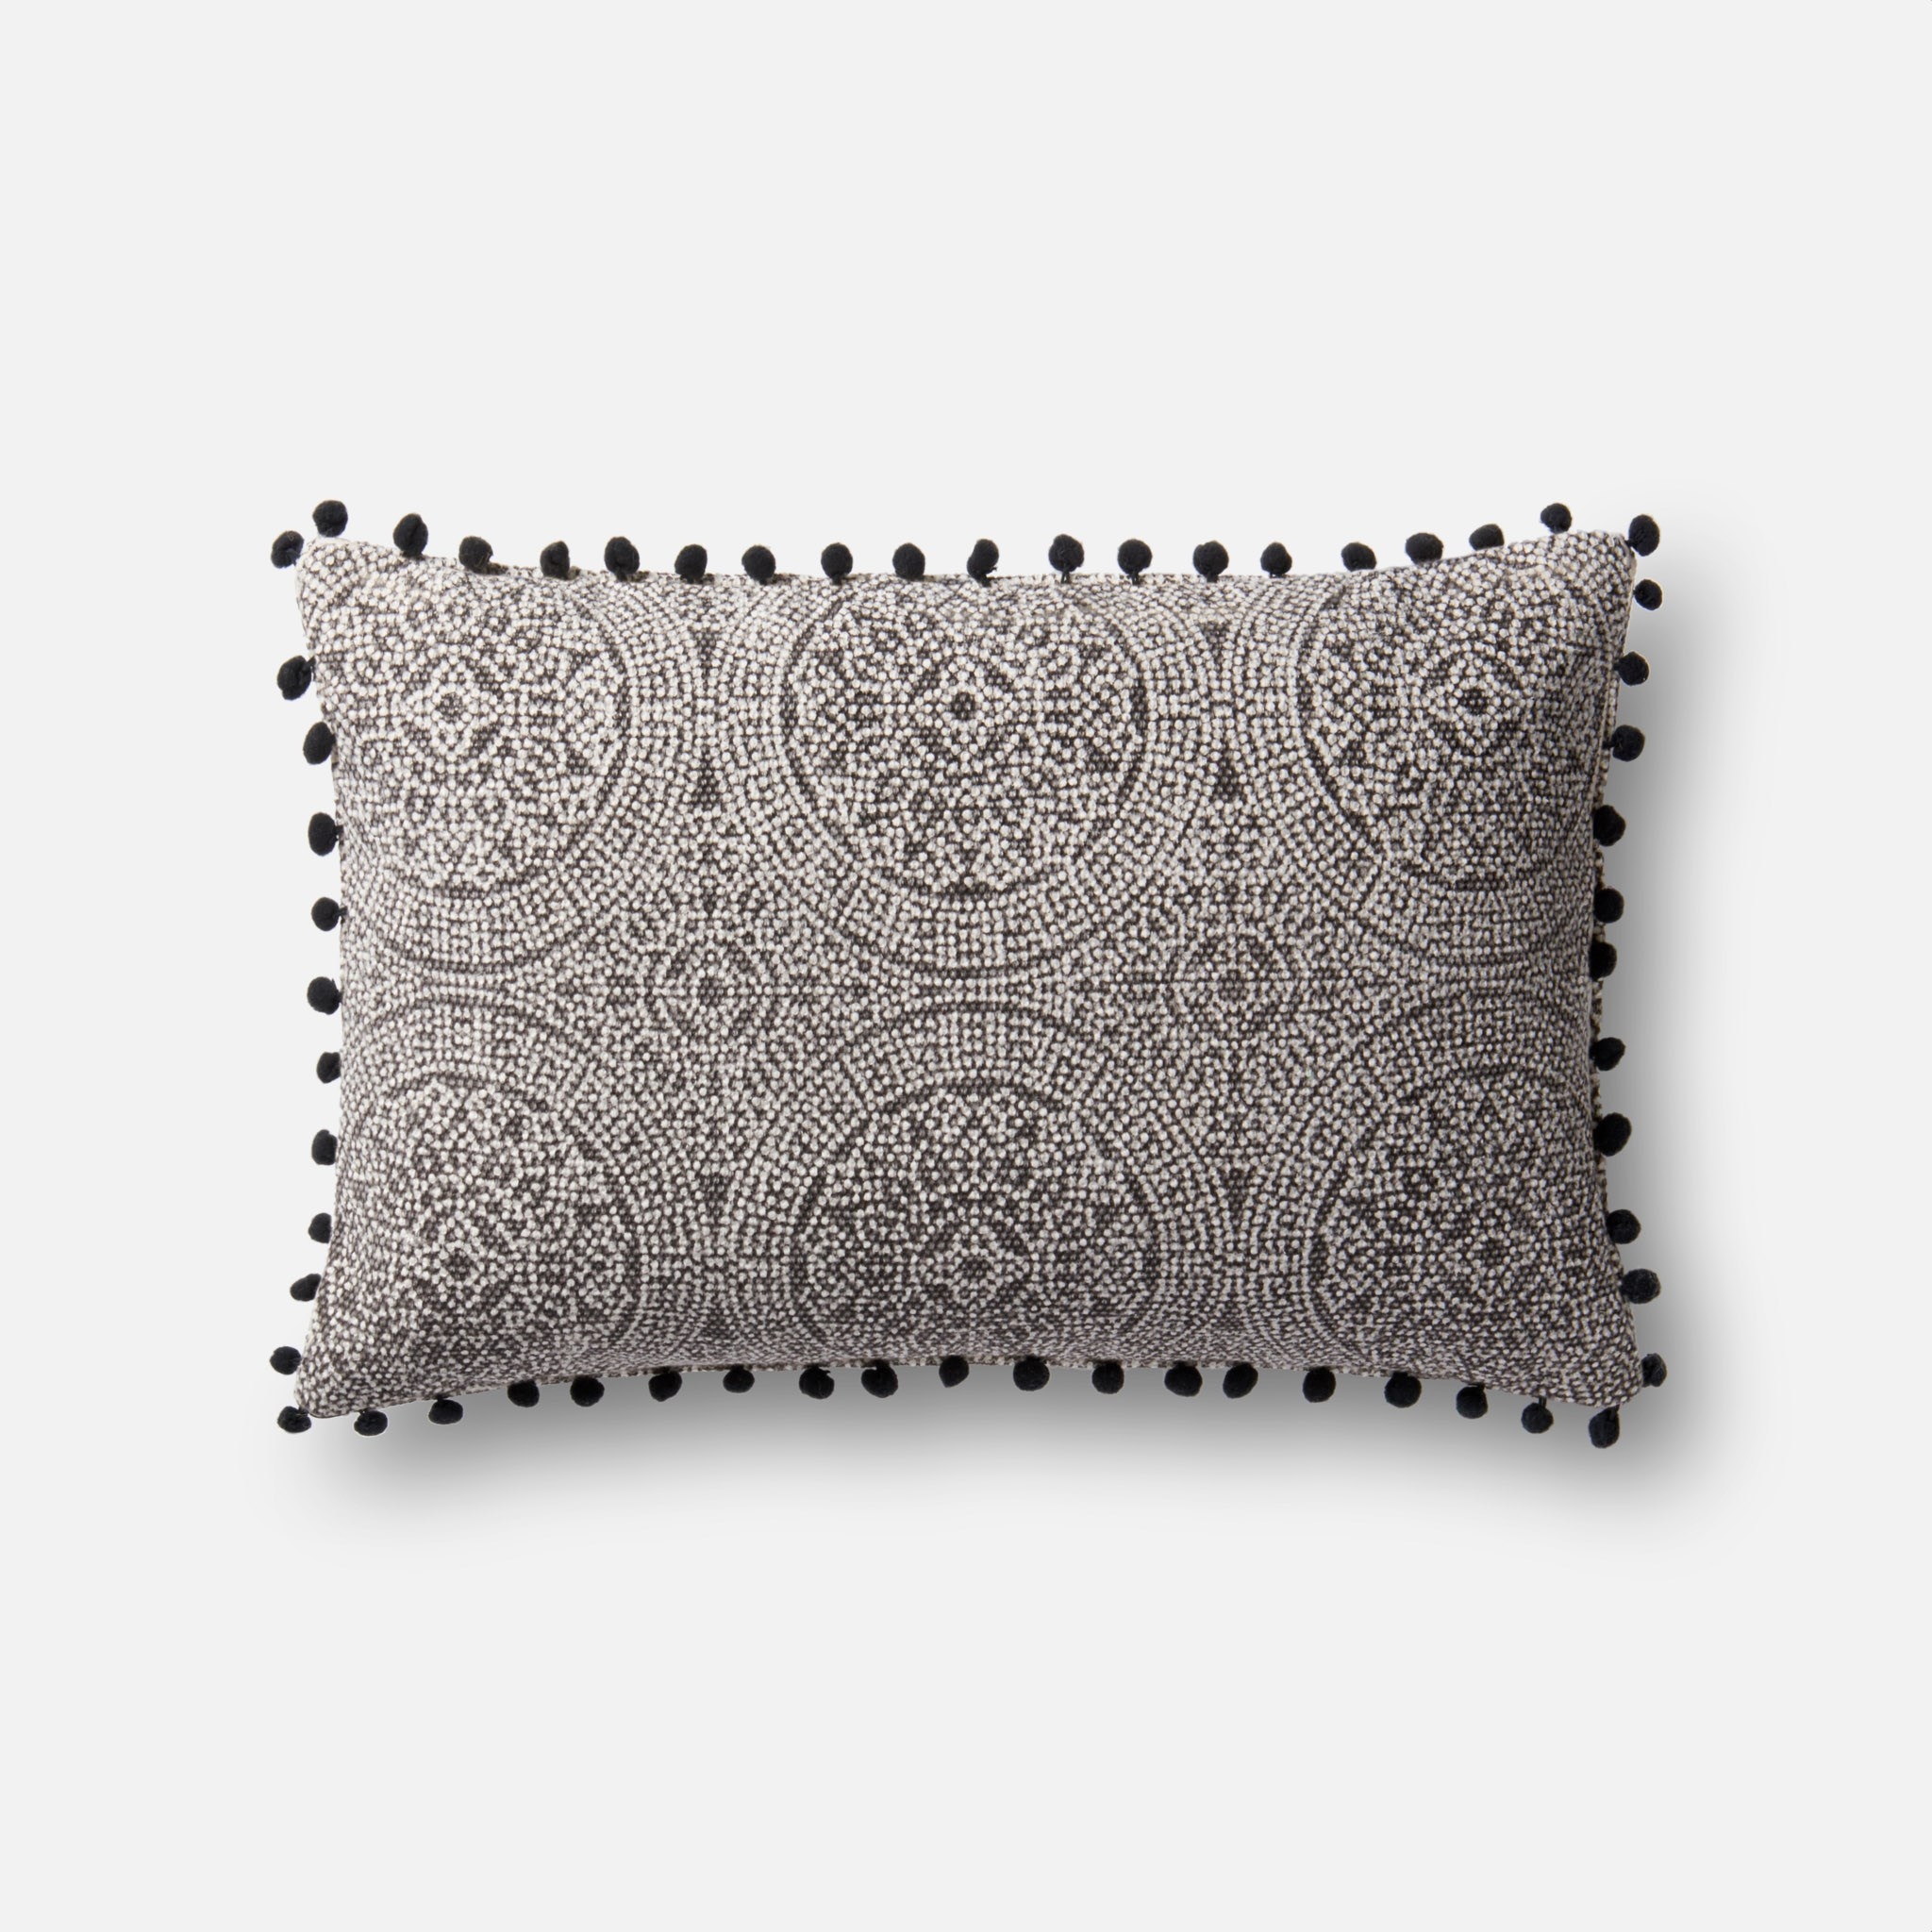 Magnolia Home by Joanna Gaines x Loloi Pillows P1021 Charcoal / Black 13" x 21" Cover Only - Image 0